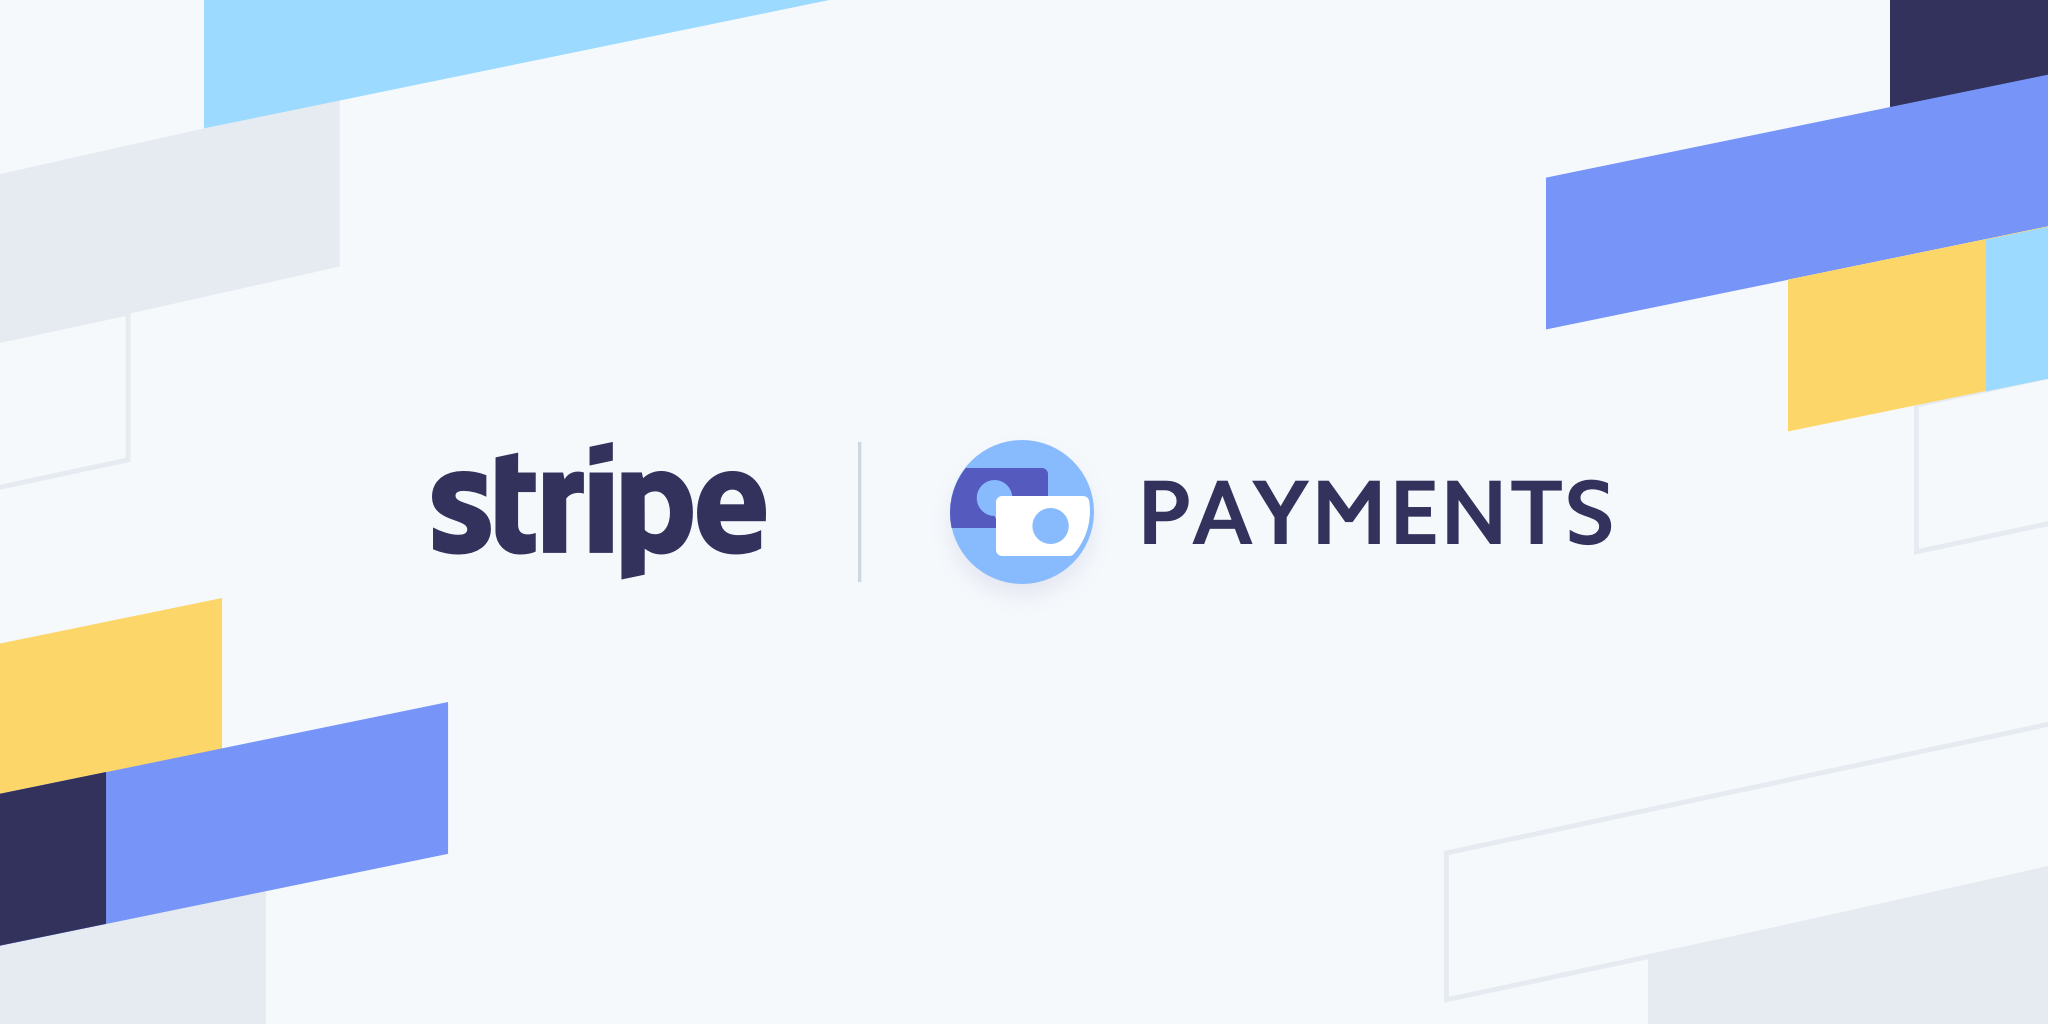 Stripe Valuation Marked Down 64% by T. Rowe Price Global Tech Fund